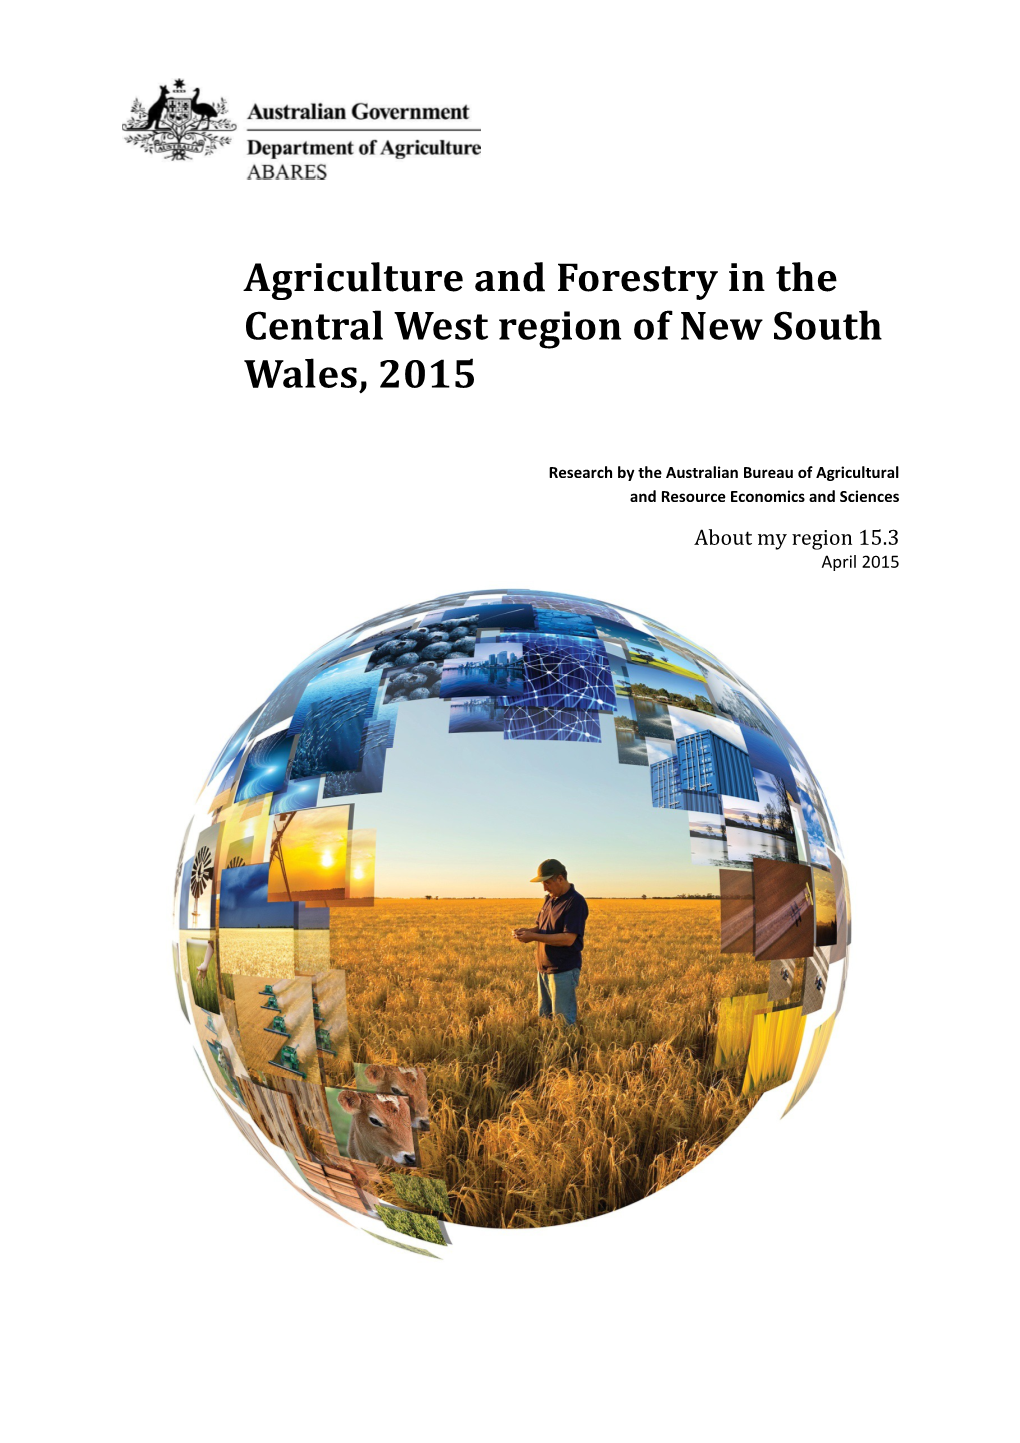 Agriculture and Forestry in the Central West Region of New South Wales, 2015